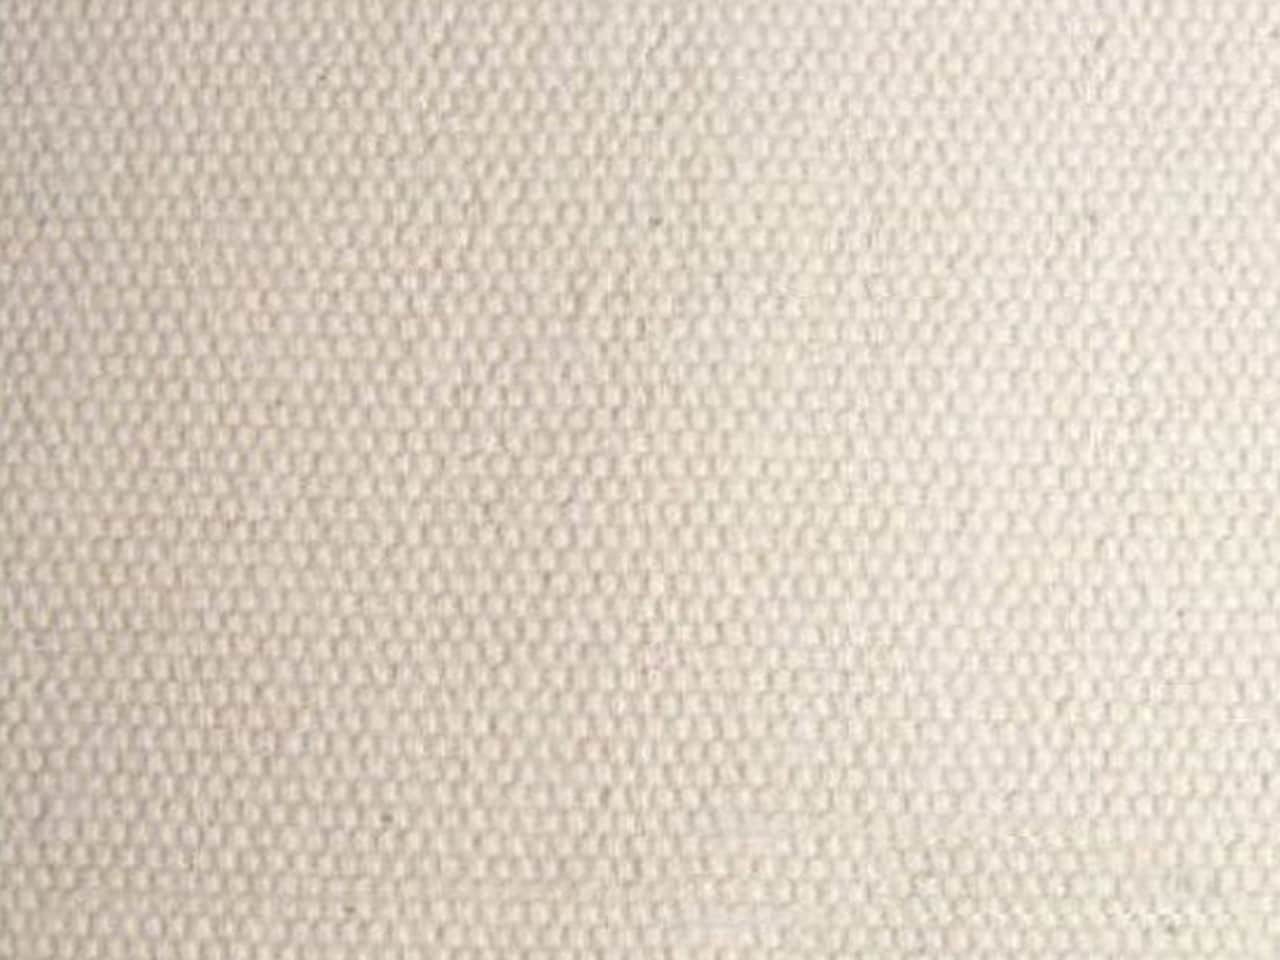 100% Cotton Canvas Fabric Natural Thick Heavy 12oz Sew Craft Upholstery  Trim DIY